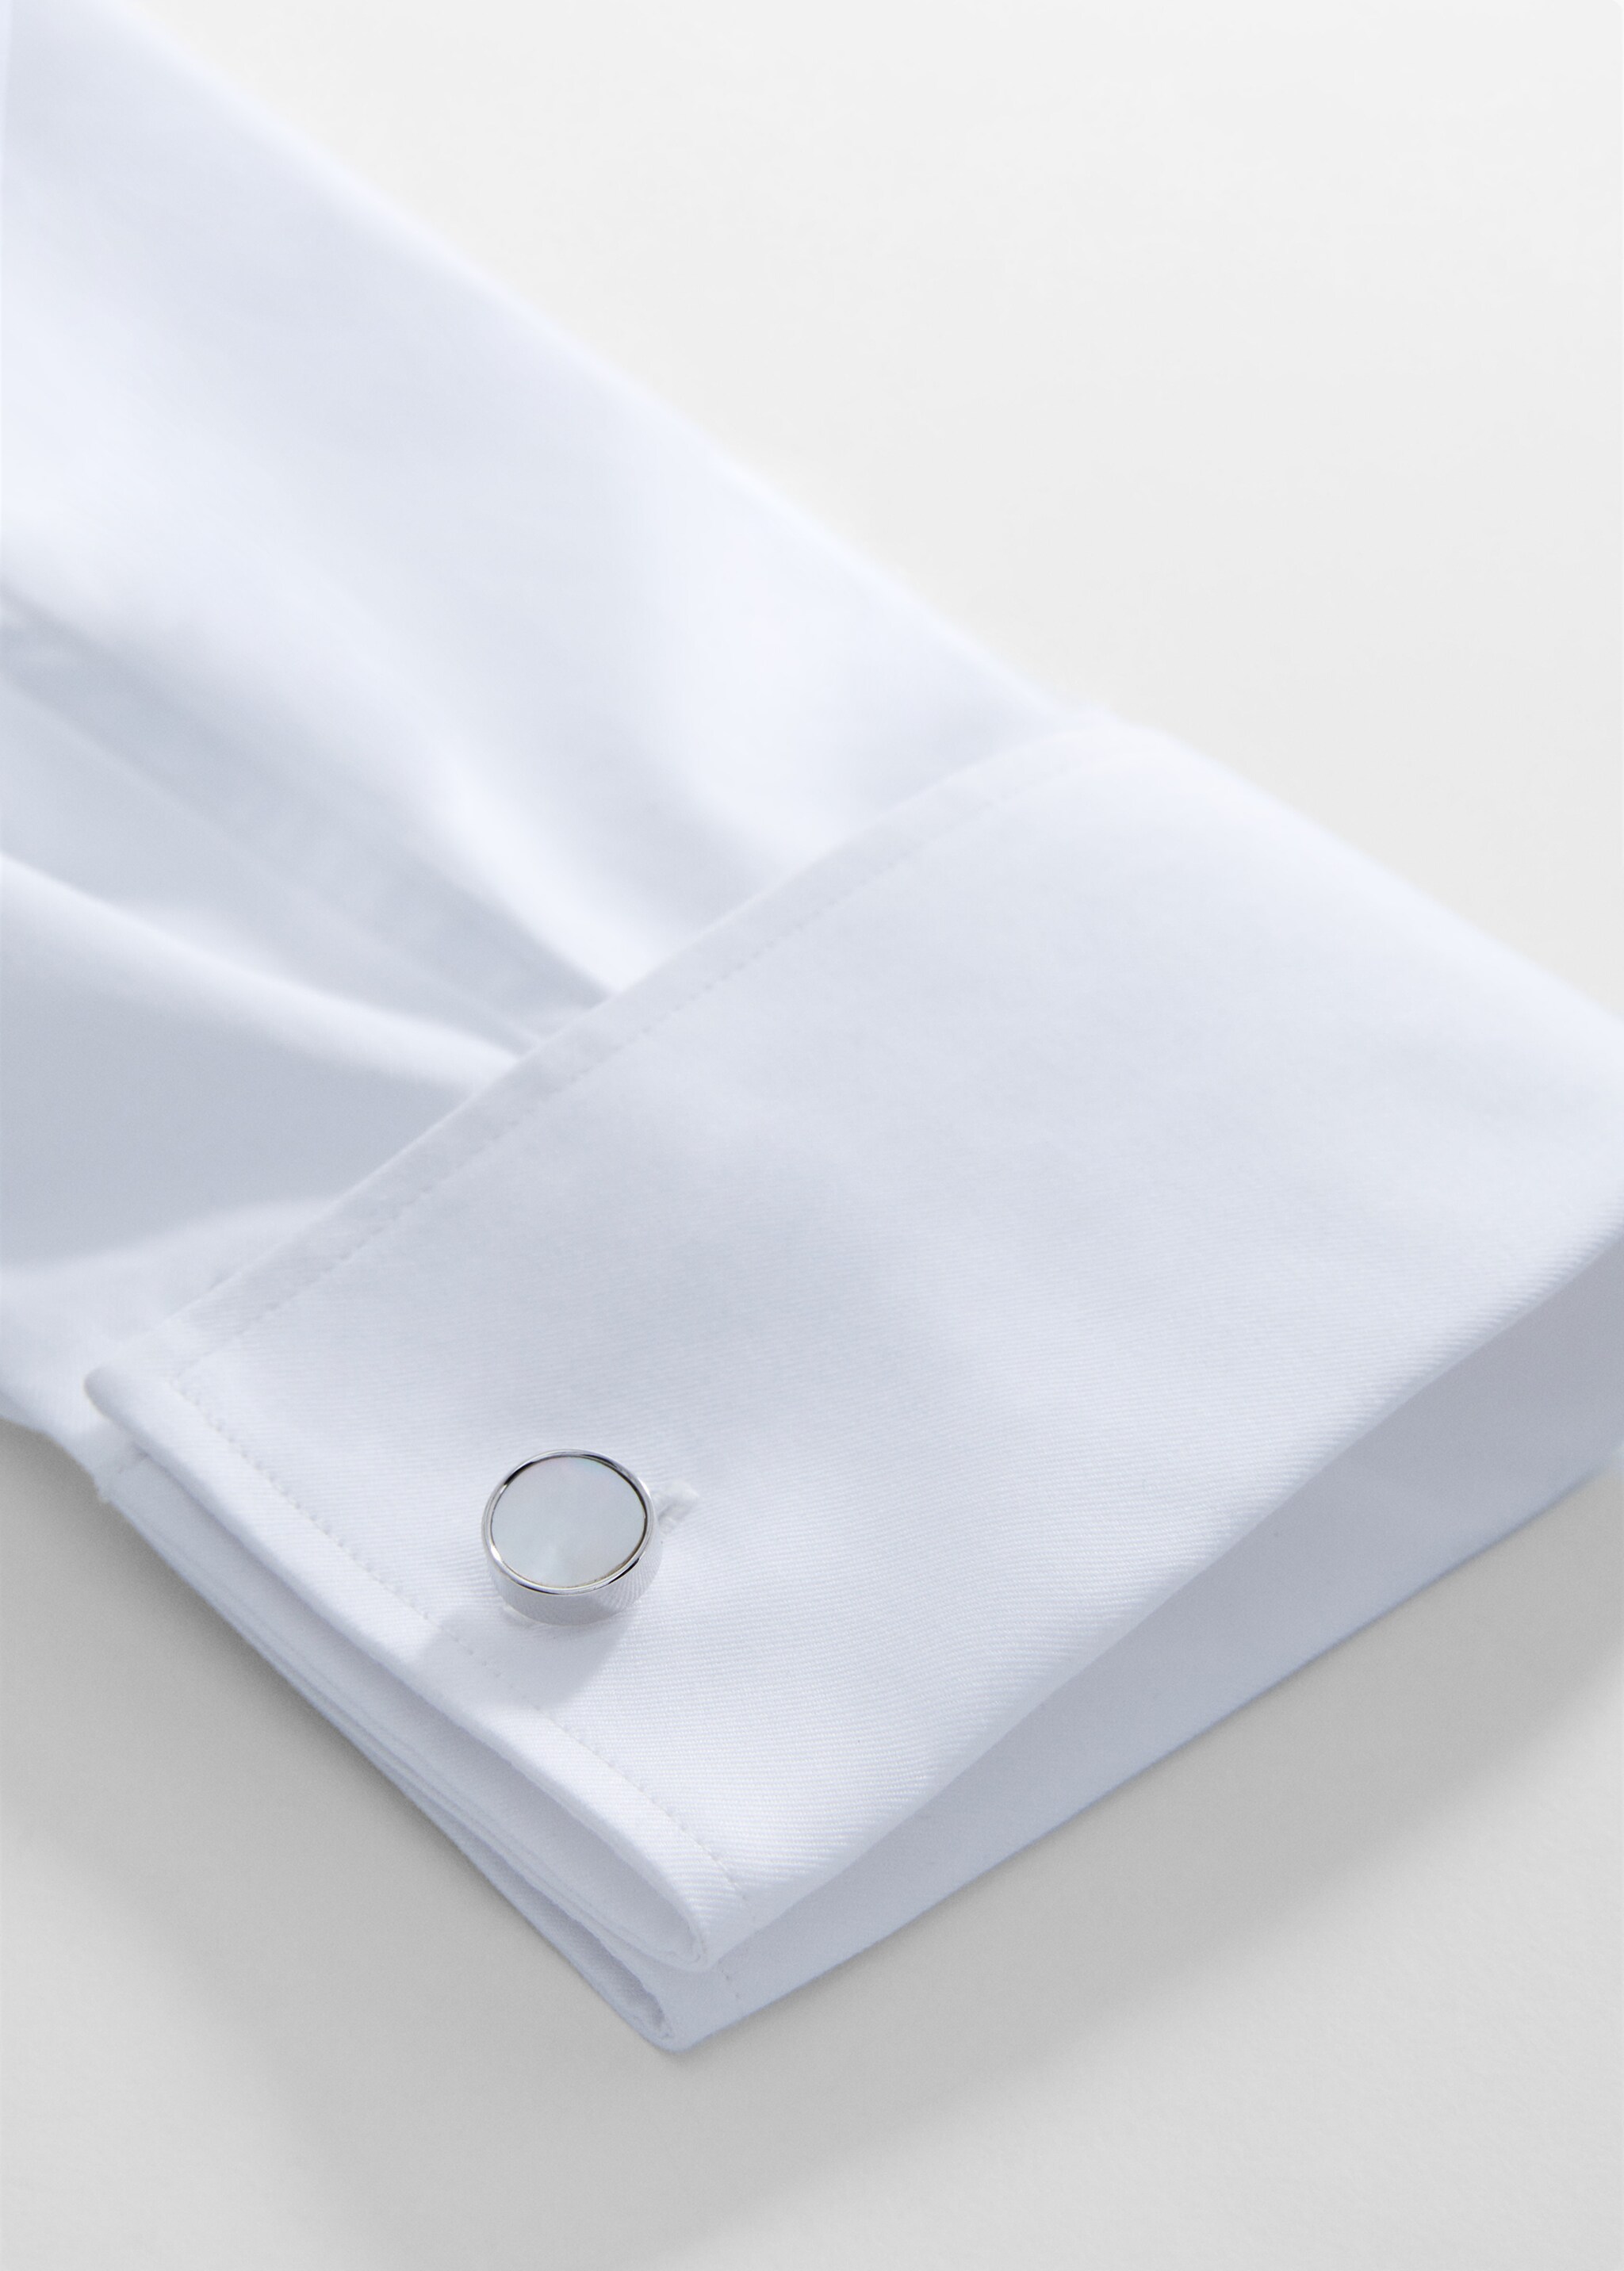 Round mother-of-pearl cufflinks - Details of the article 1